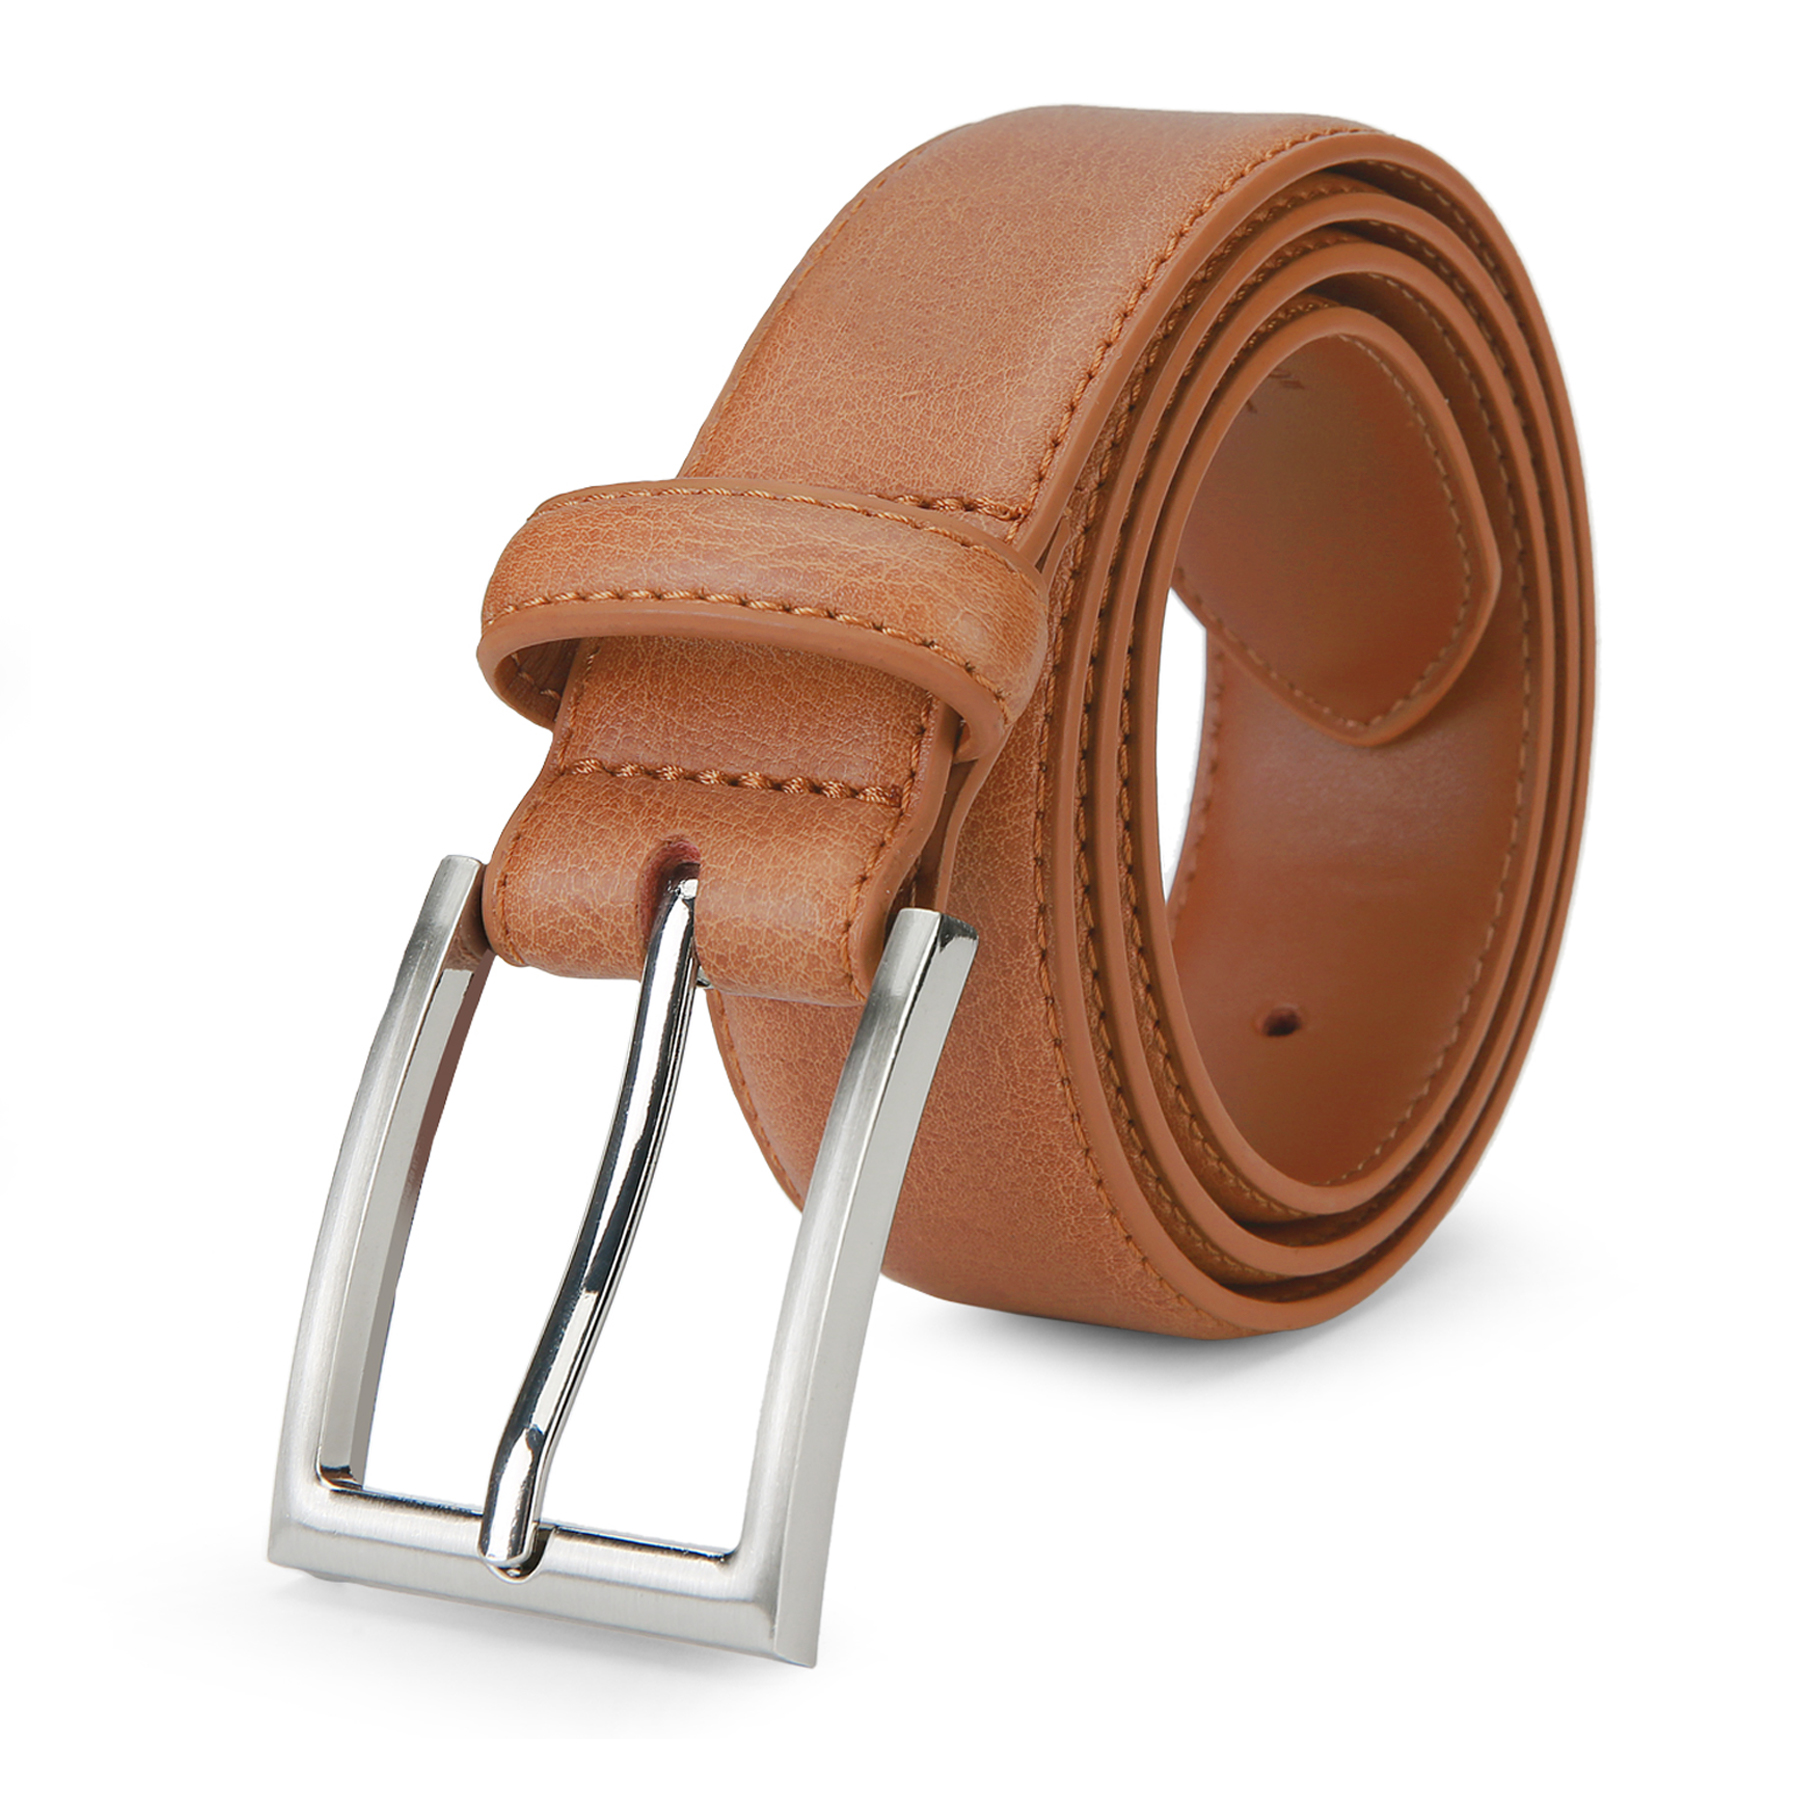 Buy Romp Fashion Men Tan Braided Leather Belt For Casual And